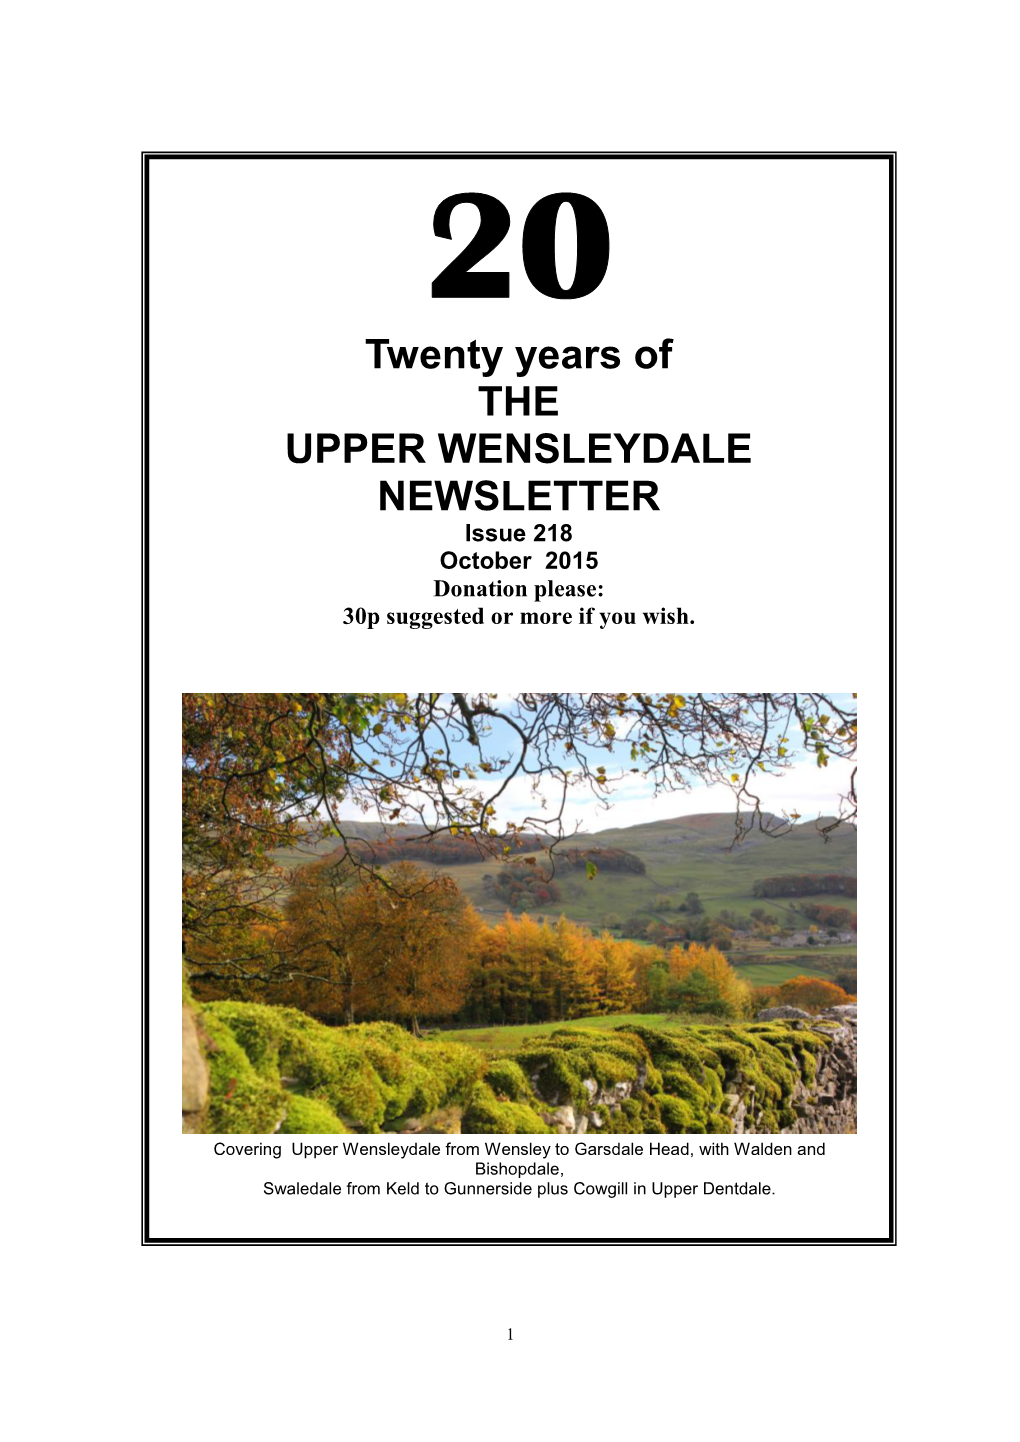 Twenty Years of the UPPER WENSLEYDALE NEWSLETTER Issue 218 October 2015 Donation Please: 30P Suggested Or More If You Wish